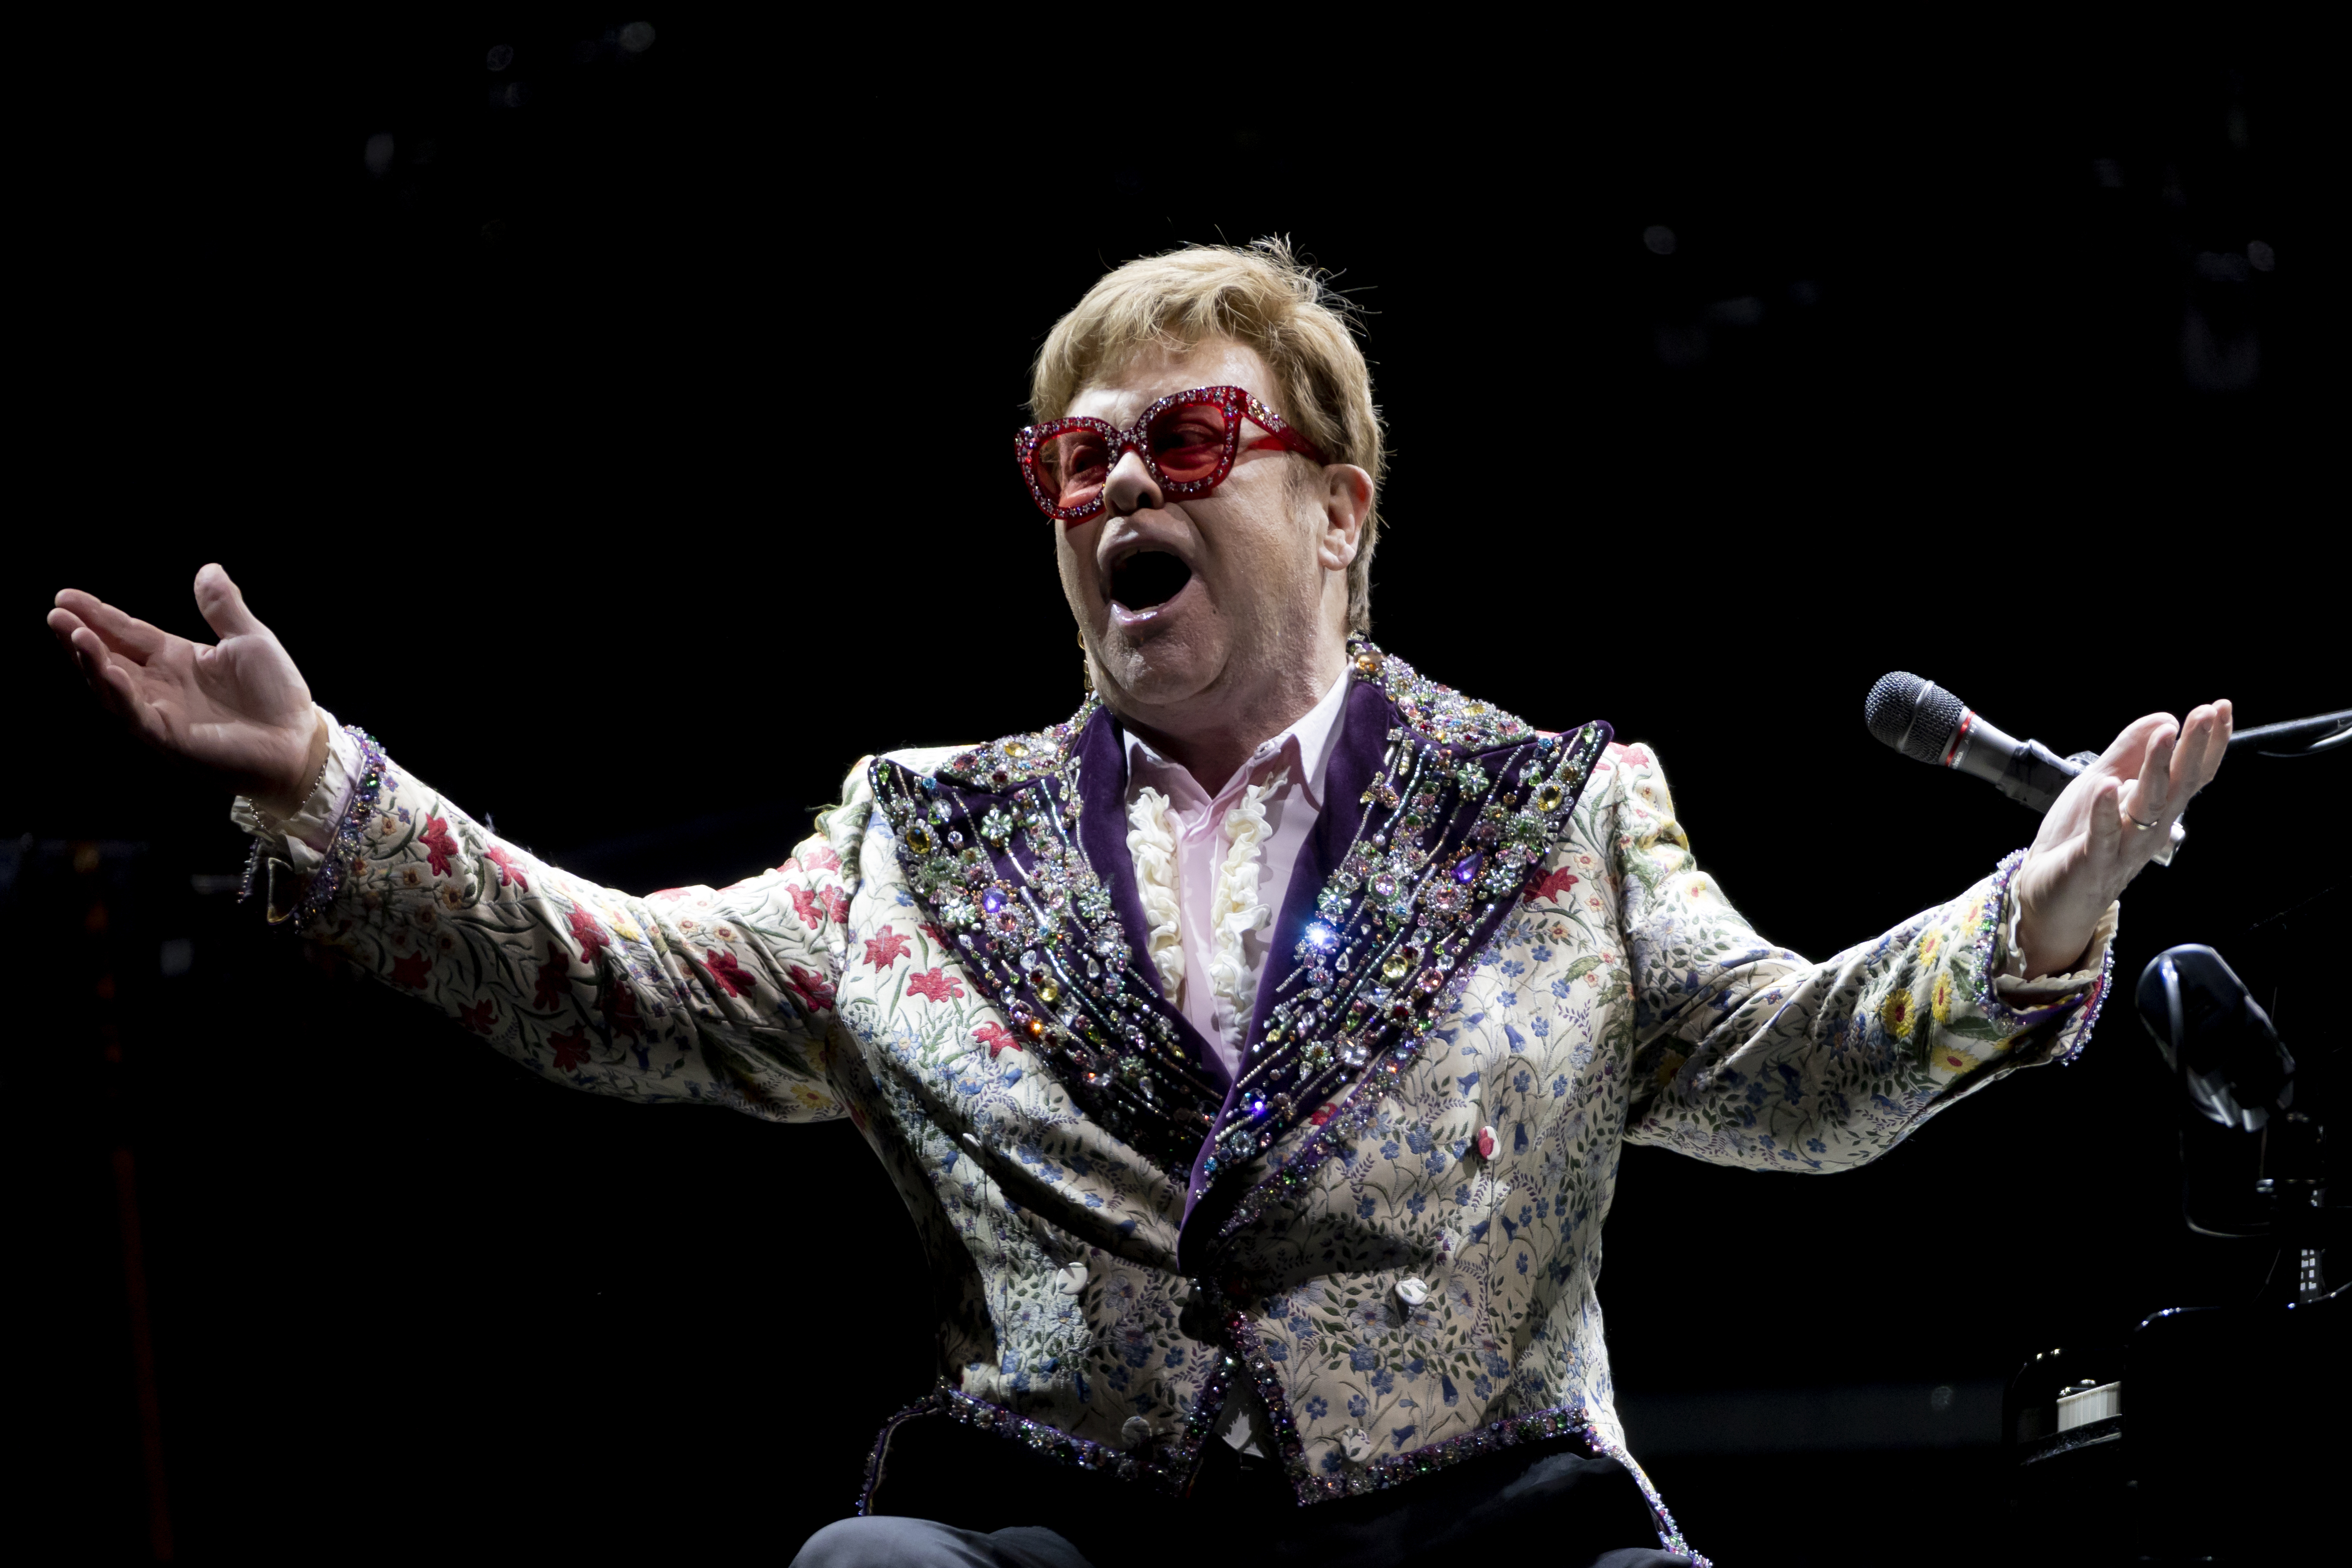 Elton John performs during the Farewell Yellow Brick Road tour on Wednesday, Jan. 19, 2022, in New Orleans.